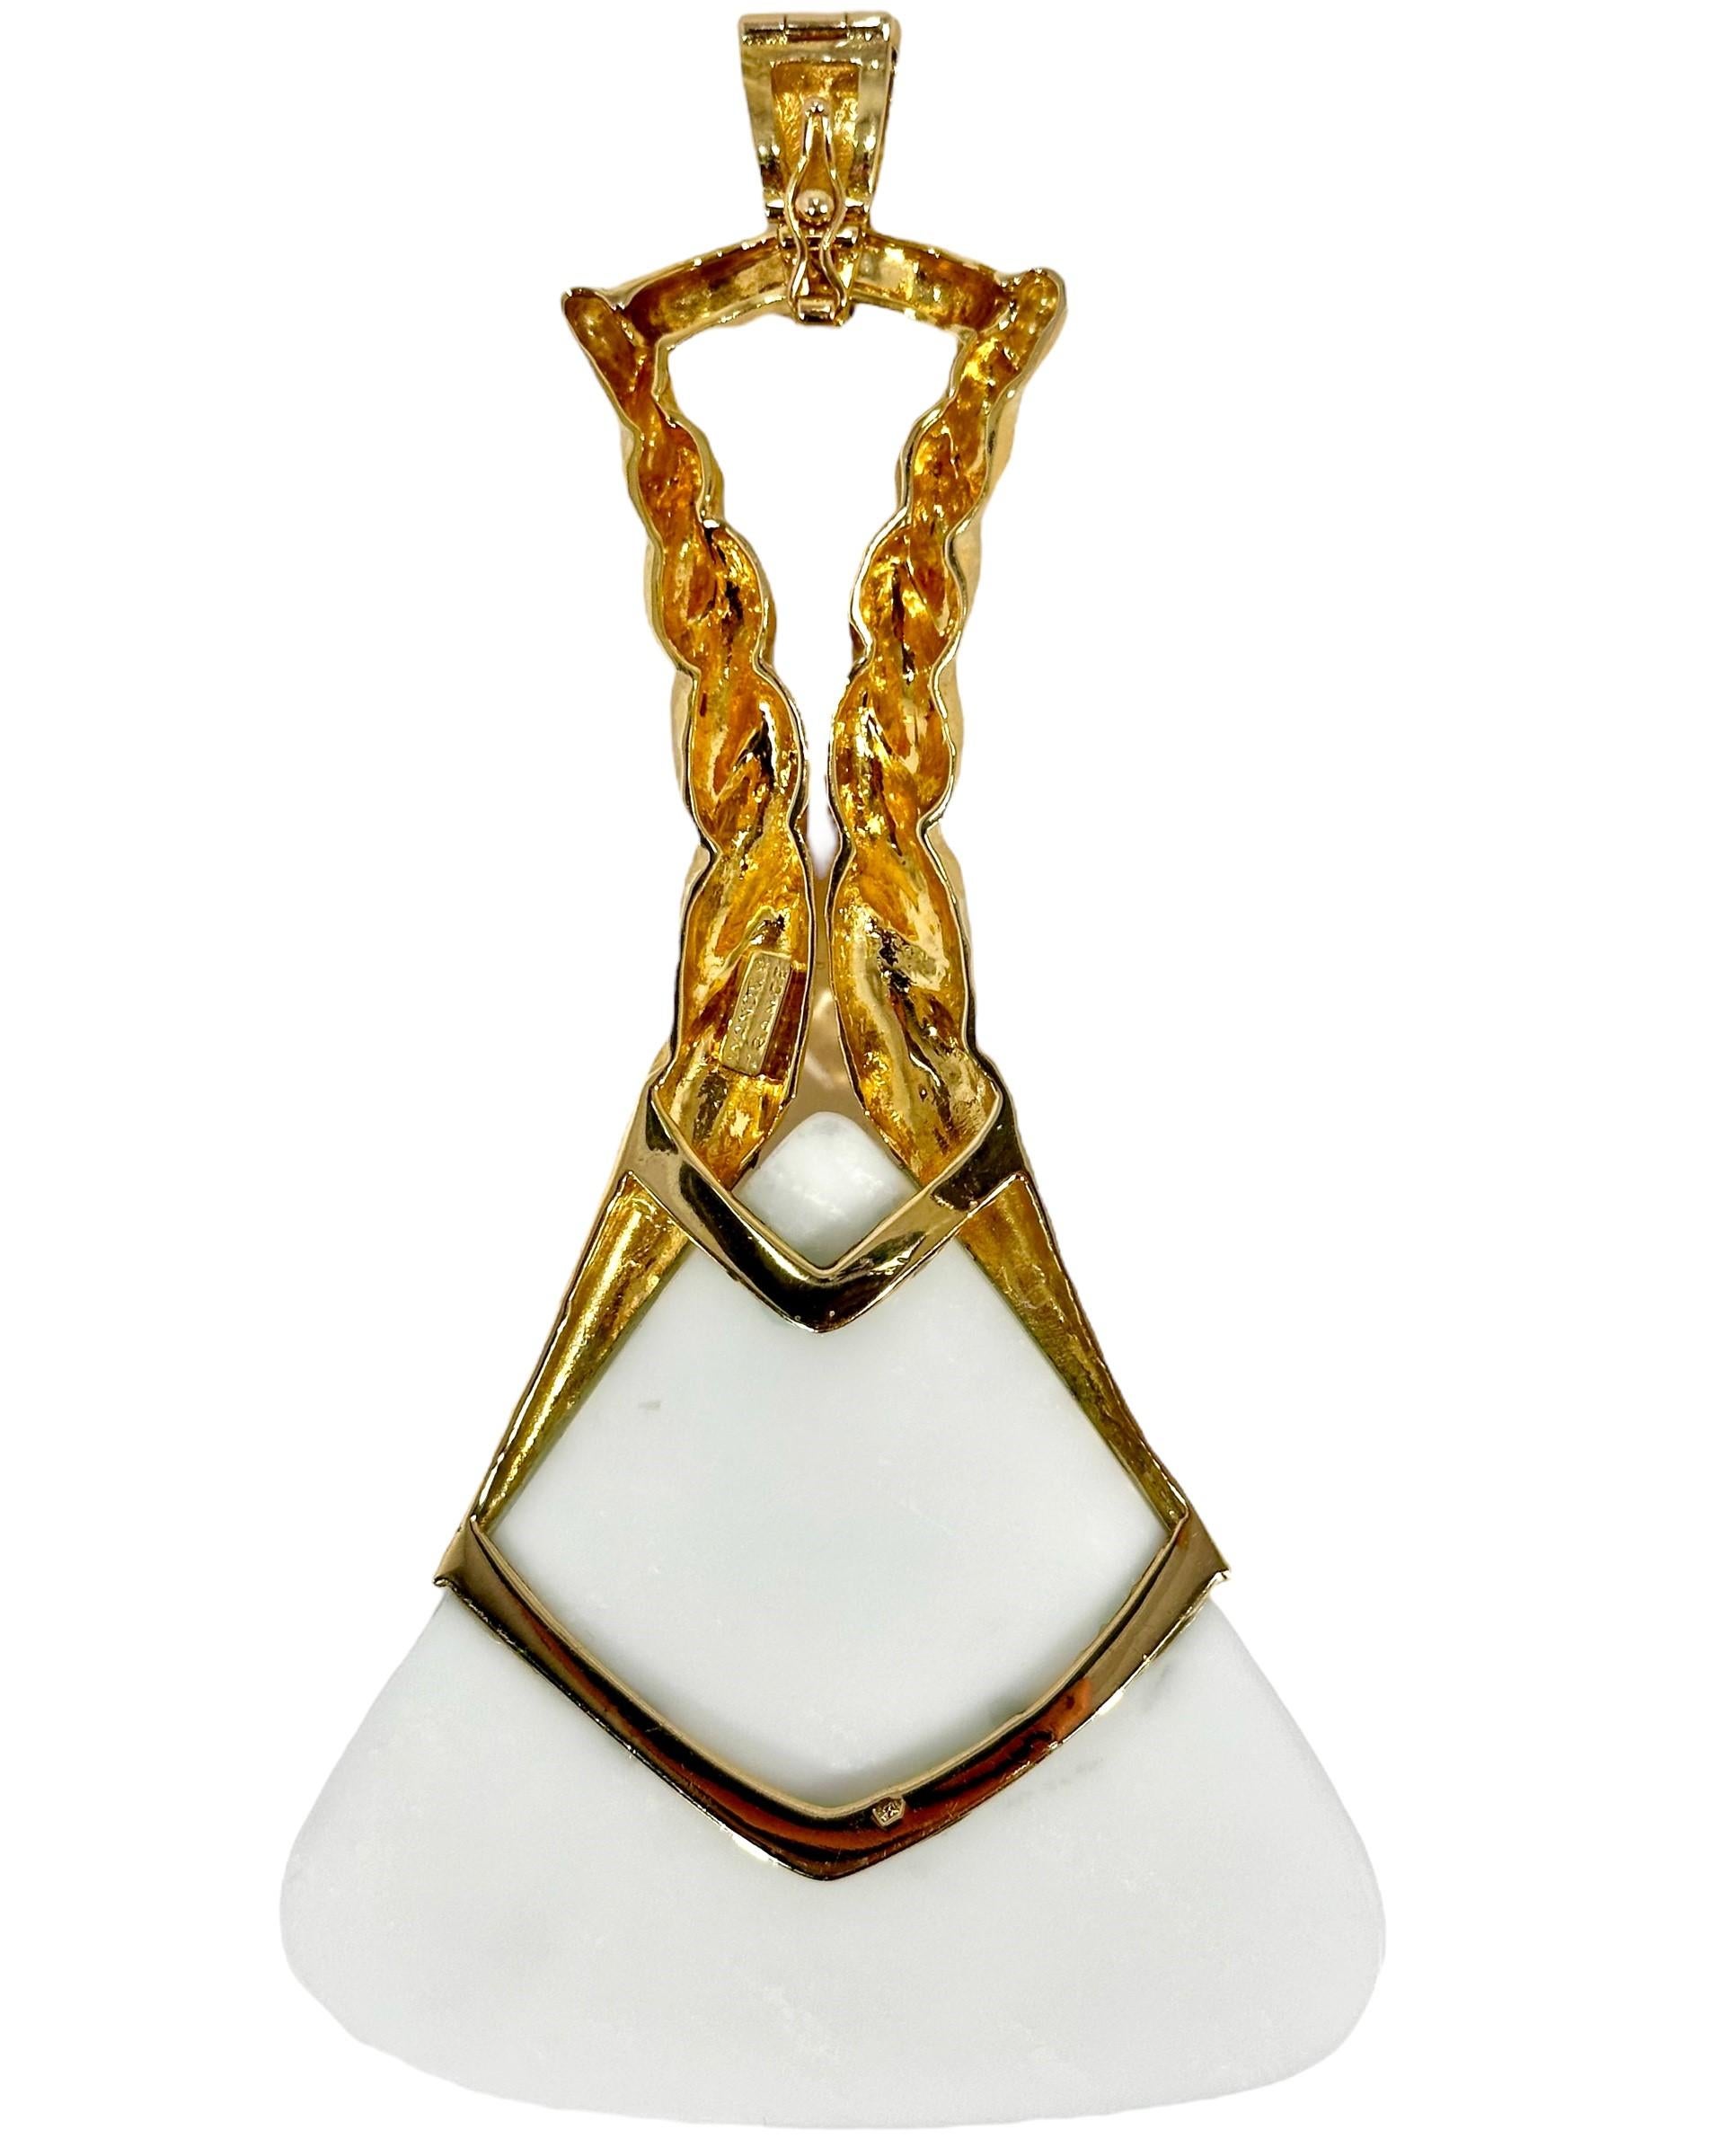 Cabochon 27 Inch Link Gold Necklace with White Onyx Pendant by French Designer Wander 